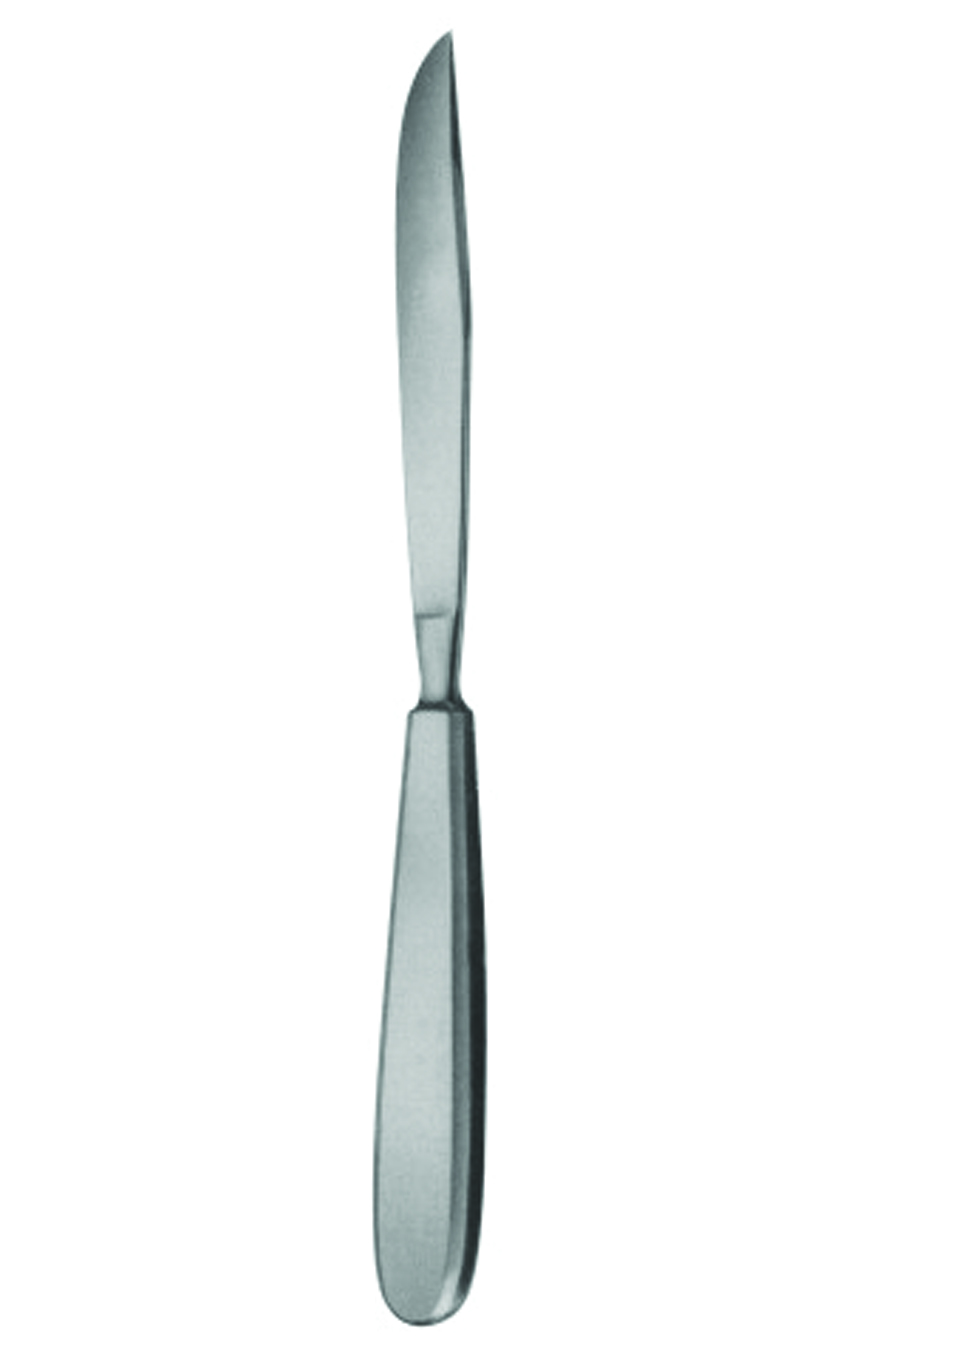 Amputation and Resection Knives